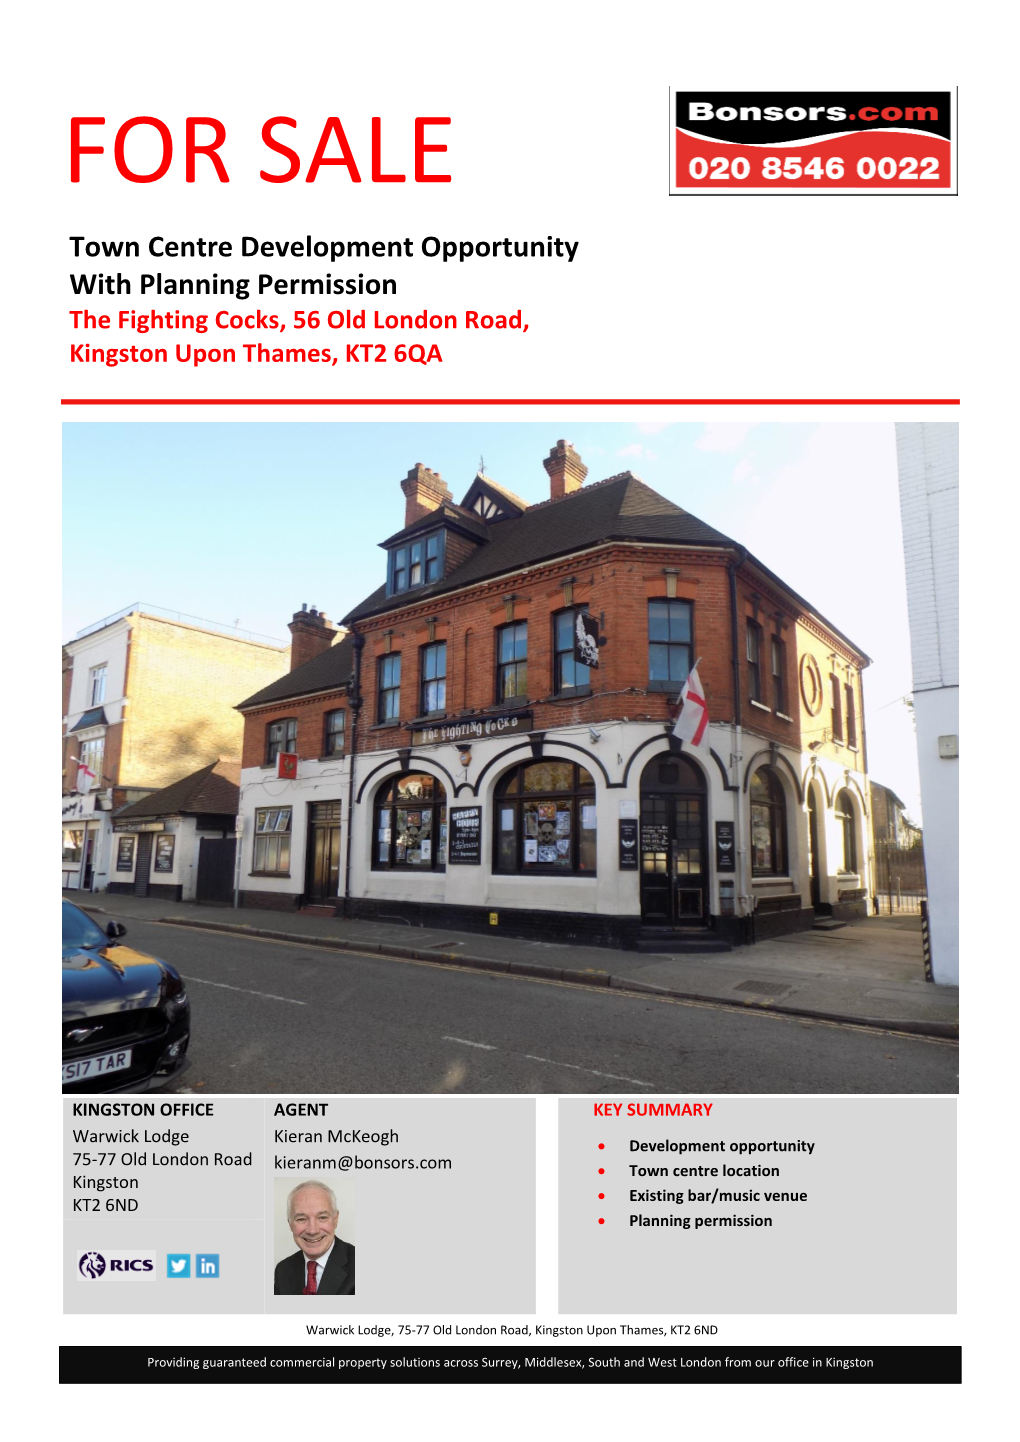 FOR SALE Town Centre Development Opportunity